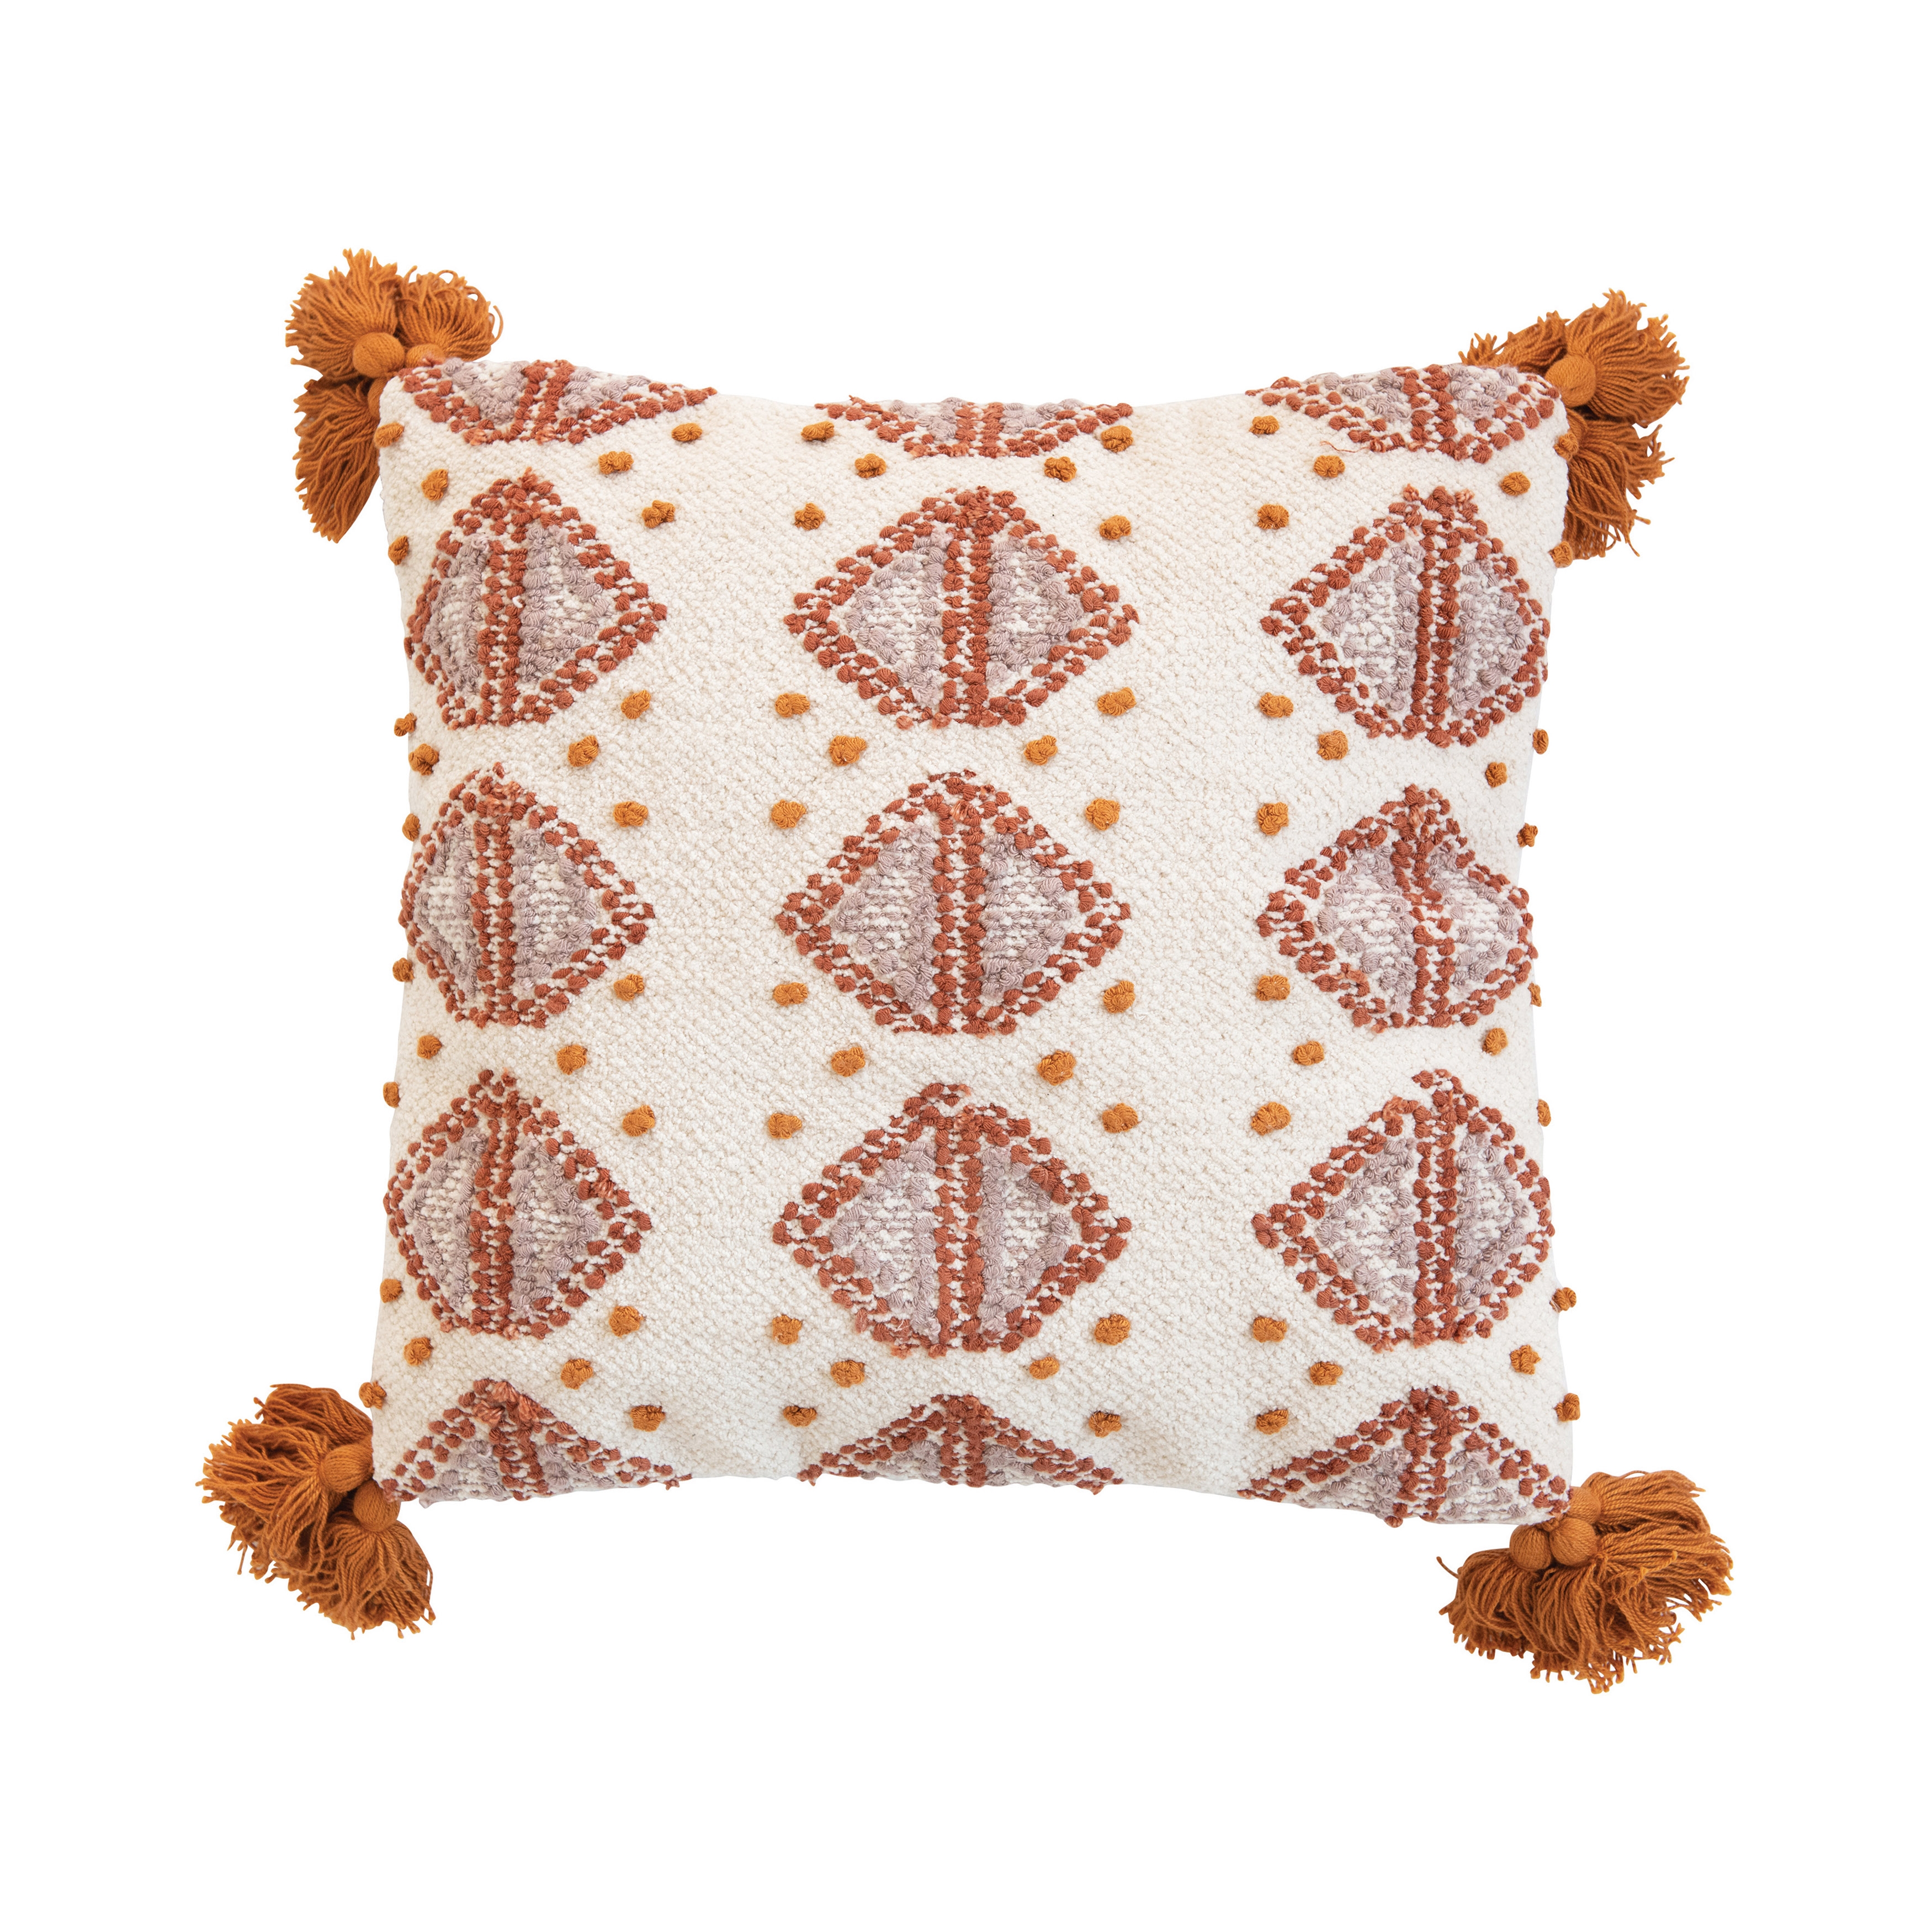 Woven Cotton Pillow with Embroidery & Tassels, Multi Color - Image 0